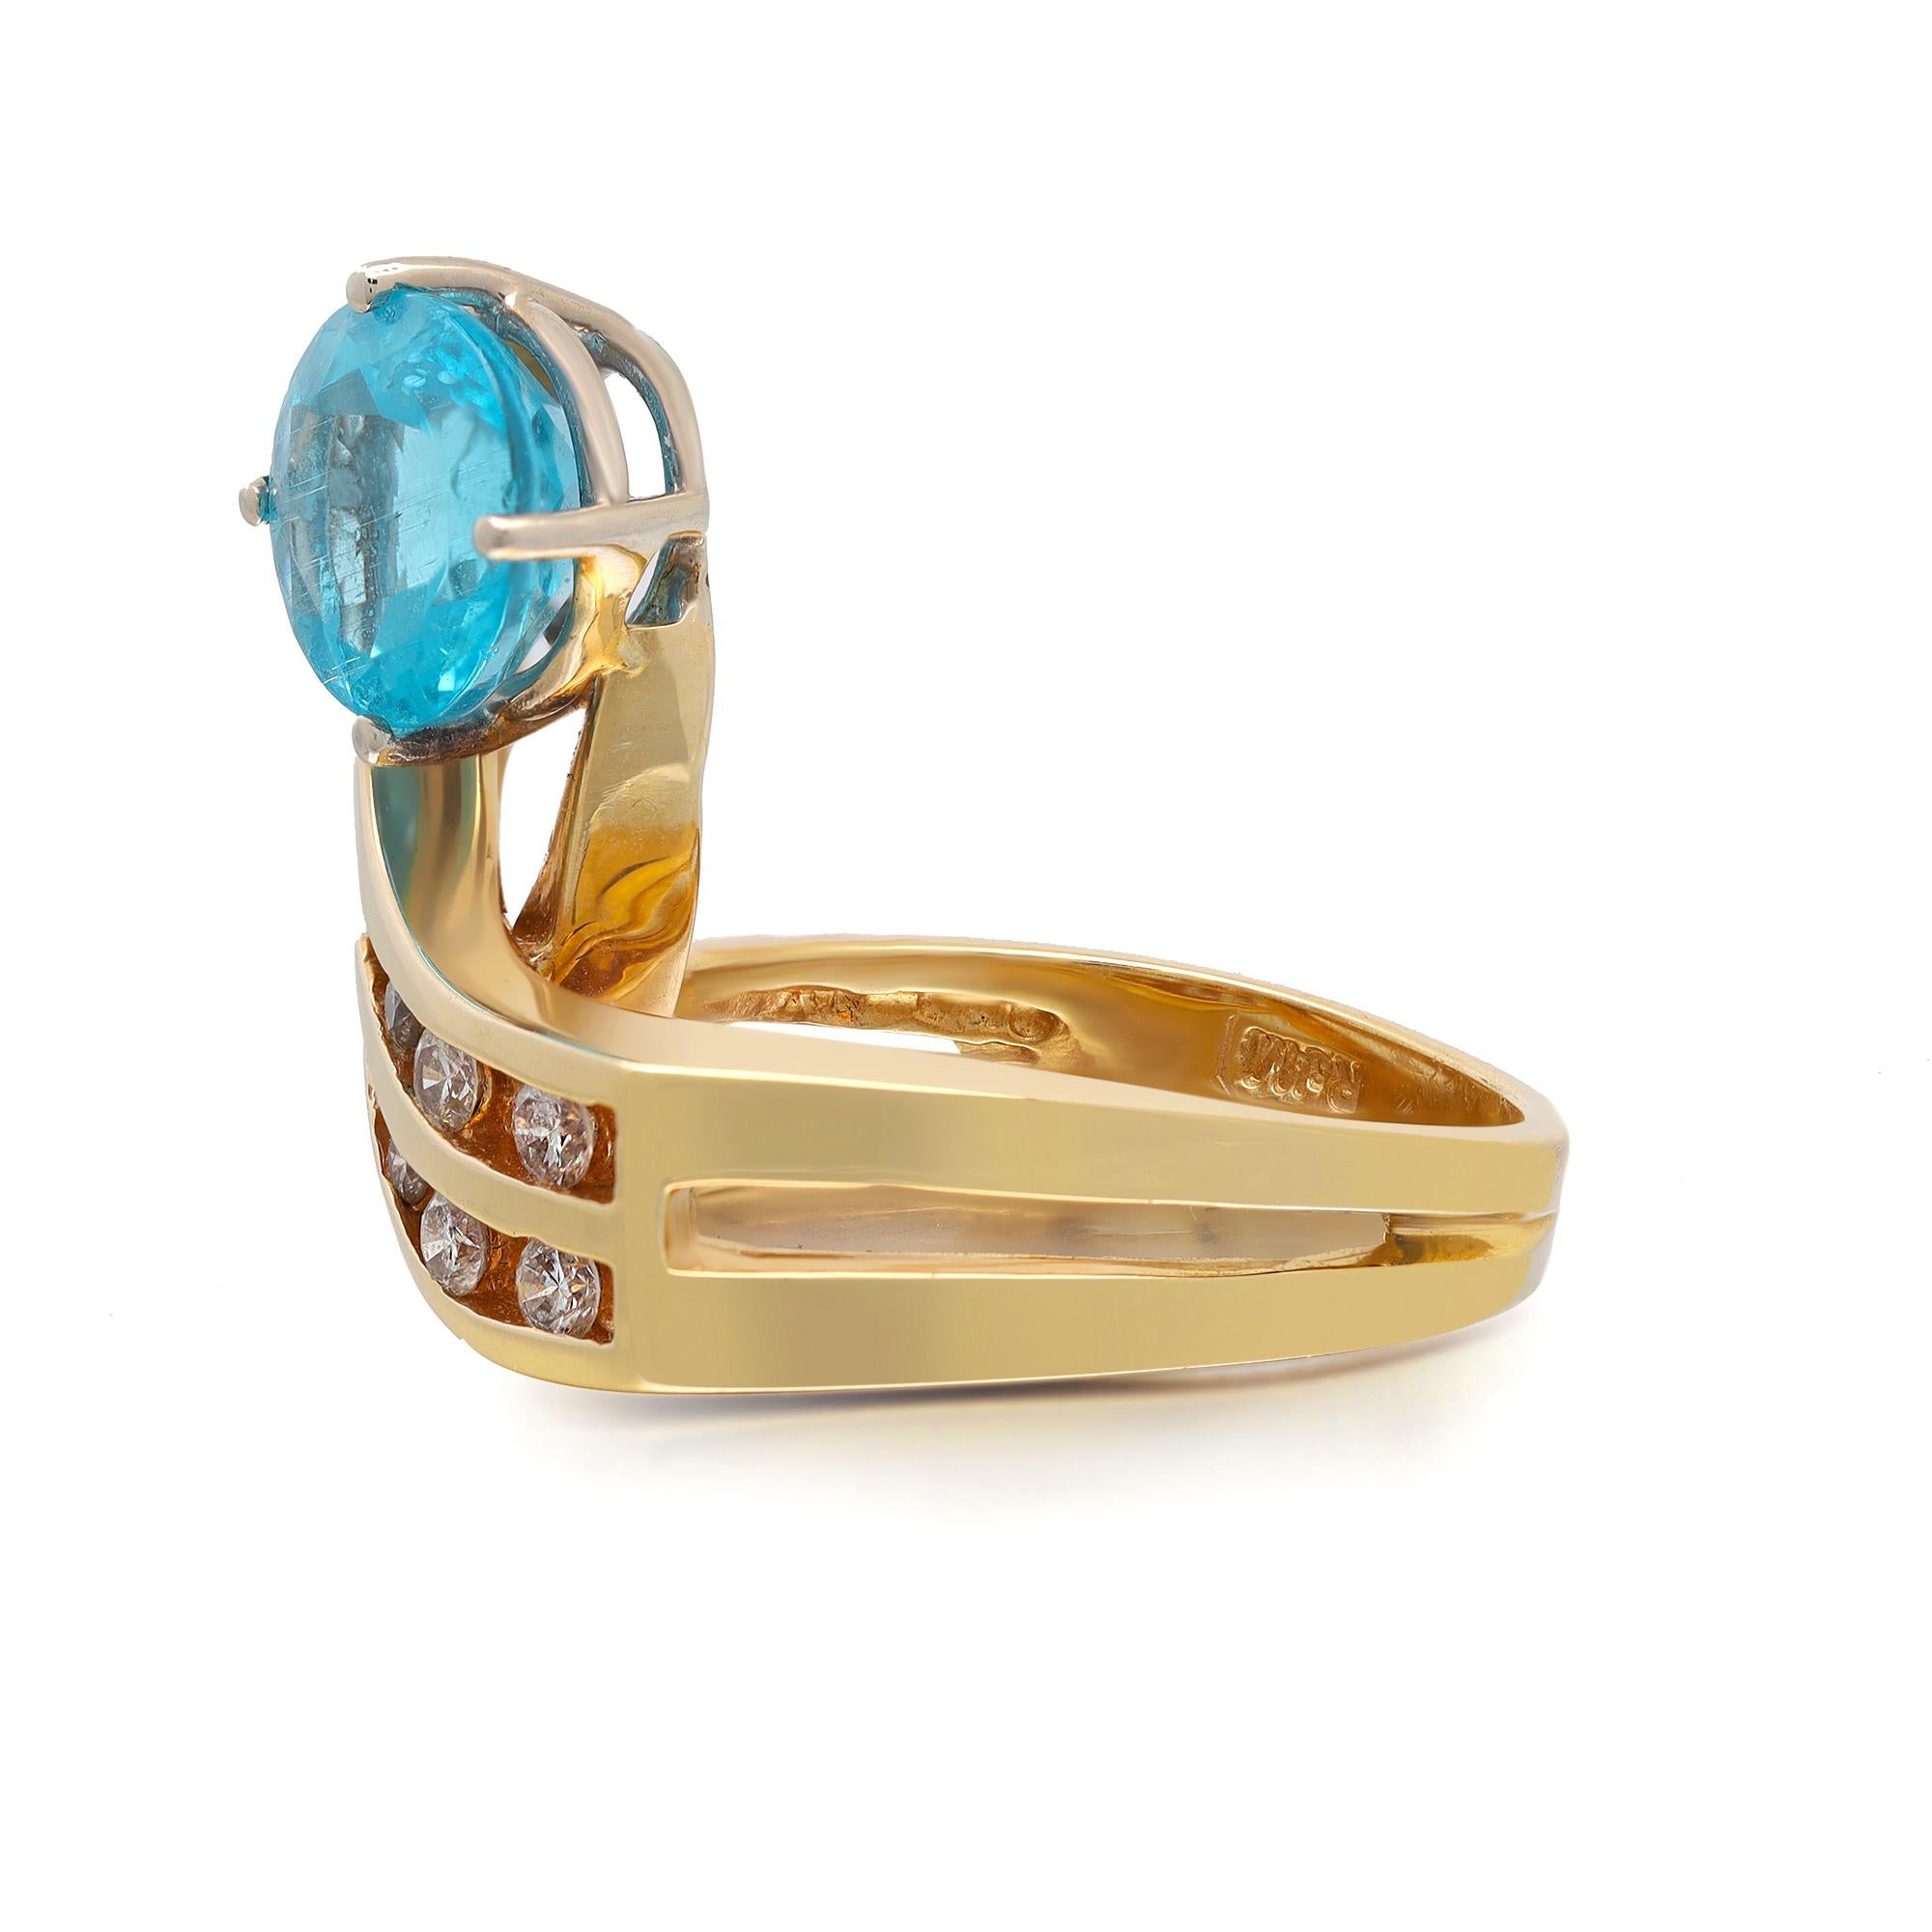 This stunning ring is crafted in 14k yellow gold and features a prong set round cut blue Apatite stone weighing 2.19 carats flanked with round brilliant cut diamonds weighing approx. 0.45 carat. Ring size: 6.5. Total weight: 7.42 grams. Great